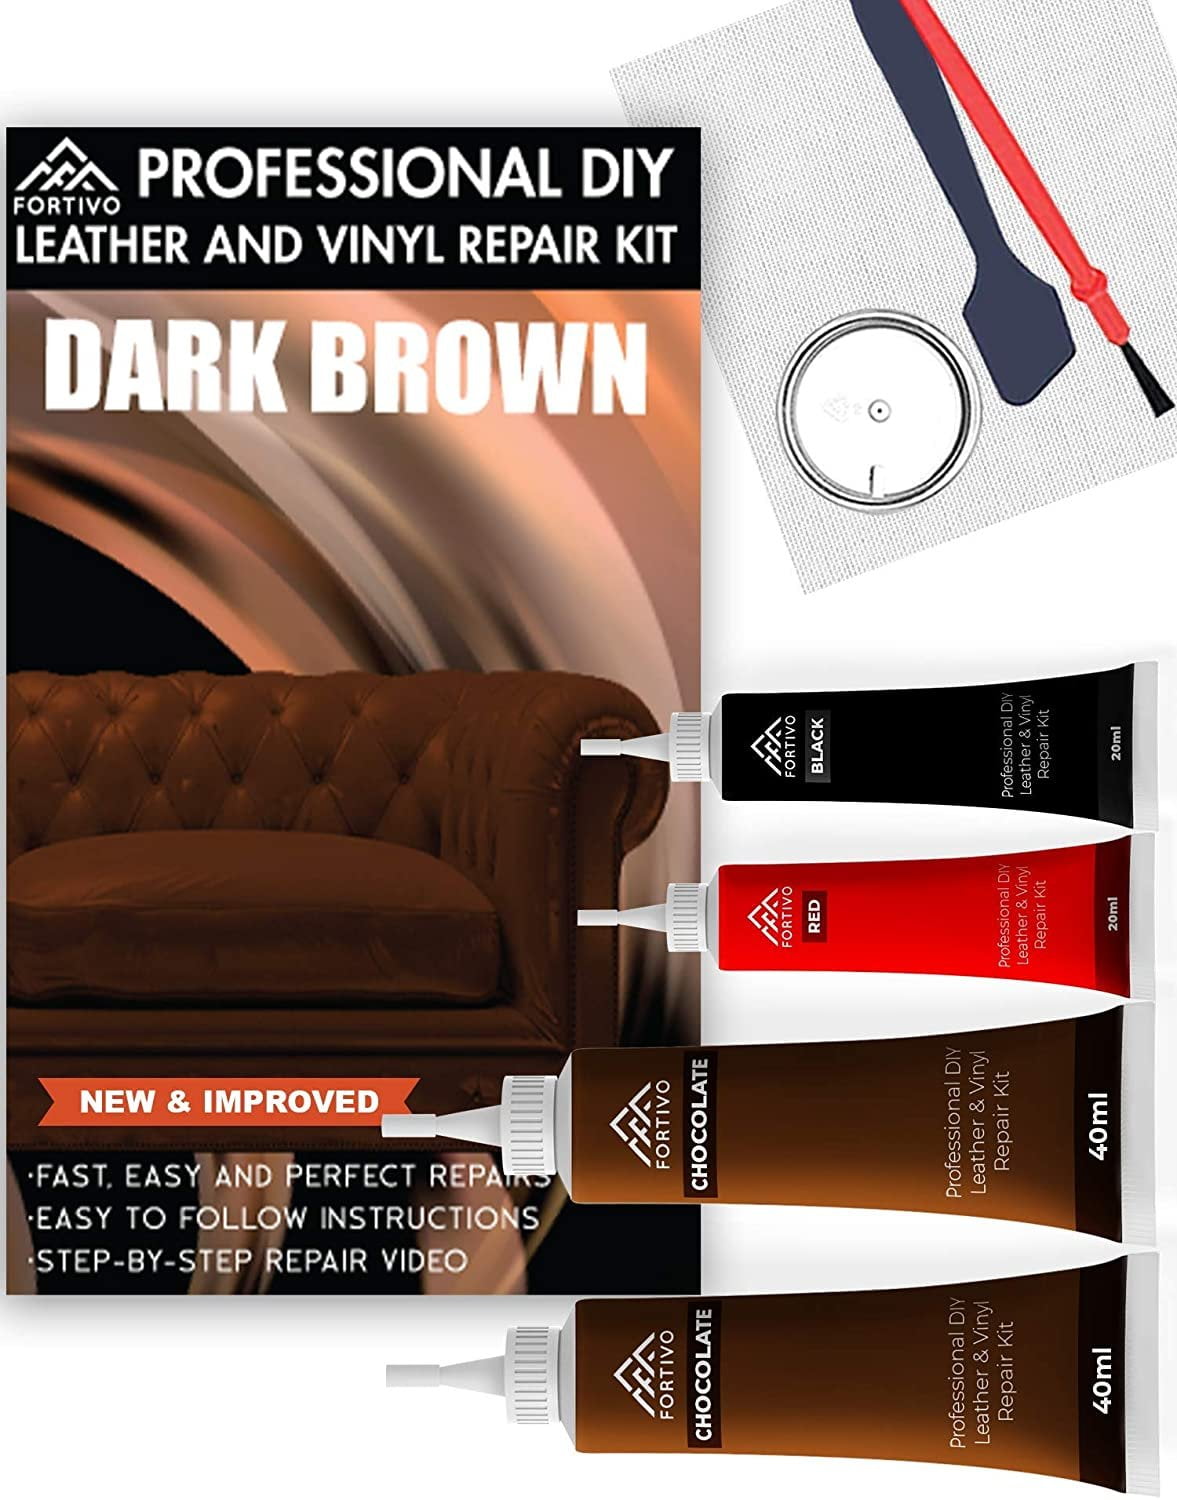 Leatherplus Leather and Vinyl Repair and Restoration Kit for Couch